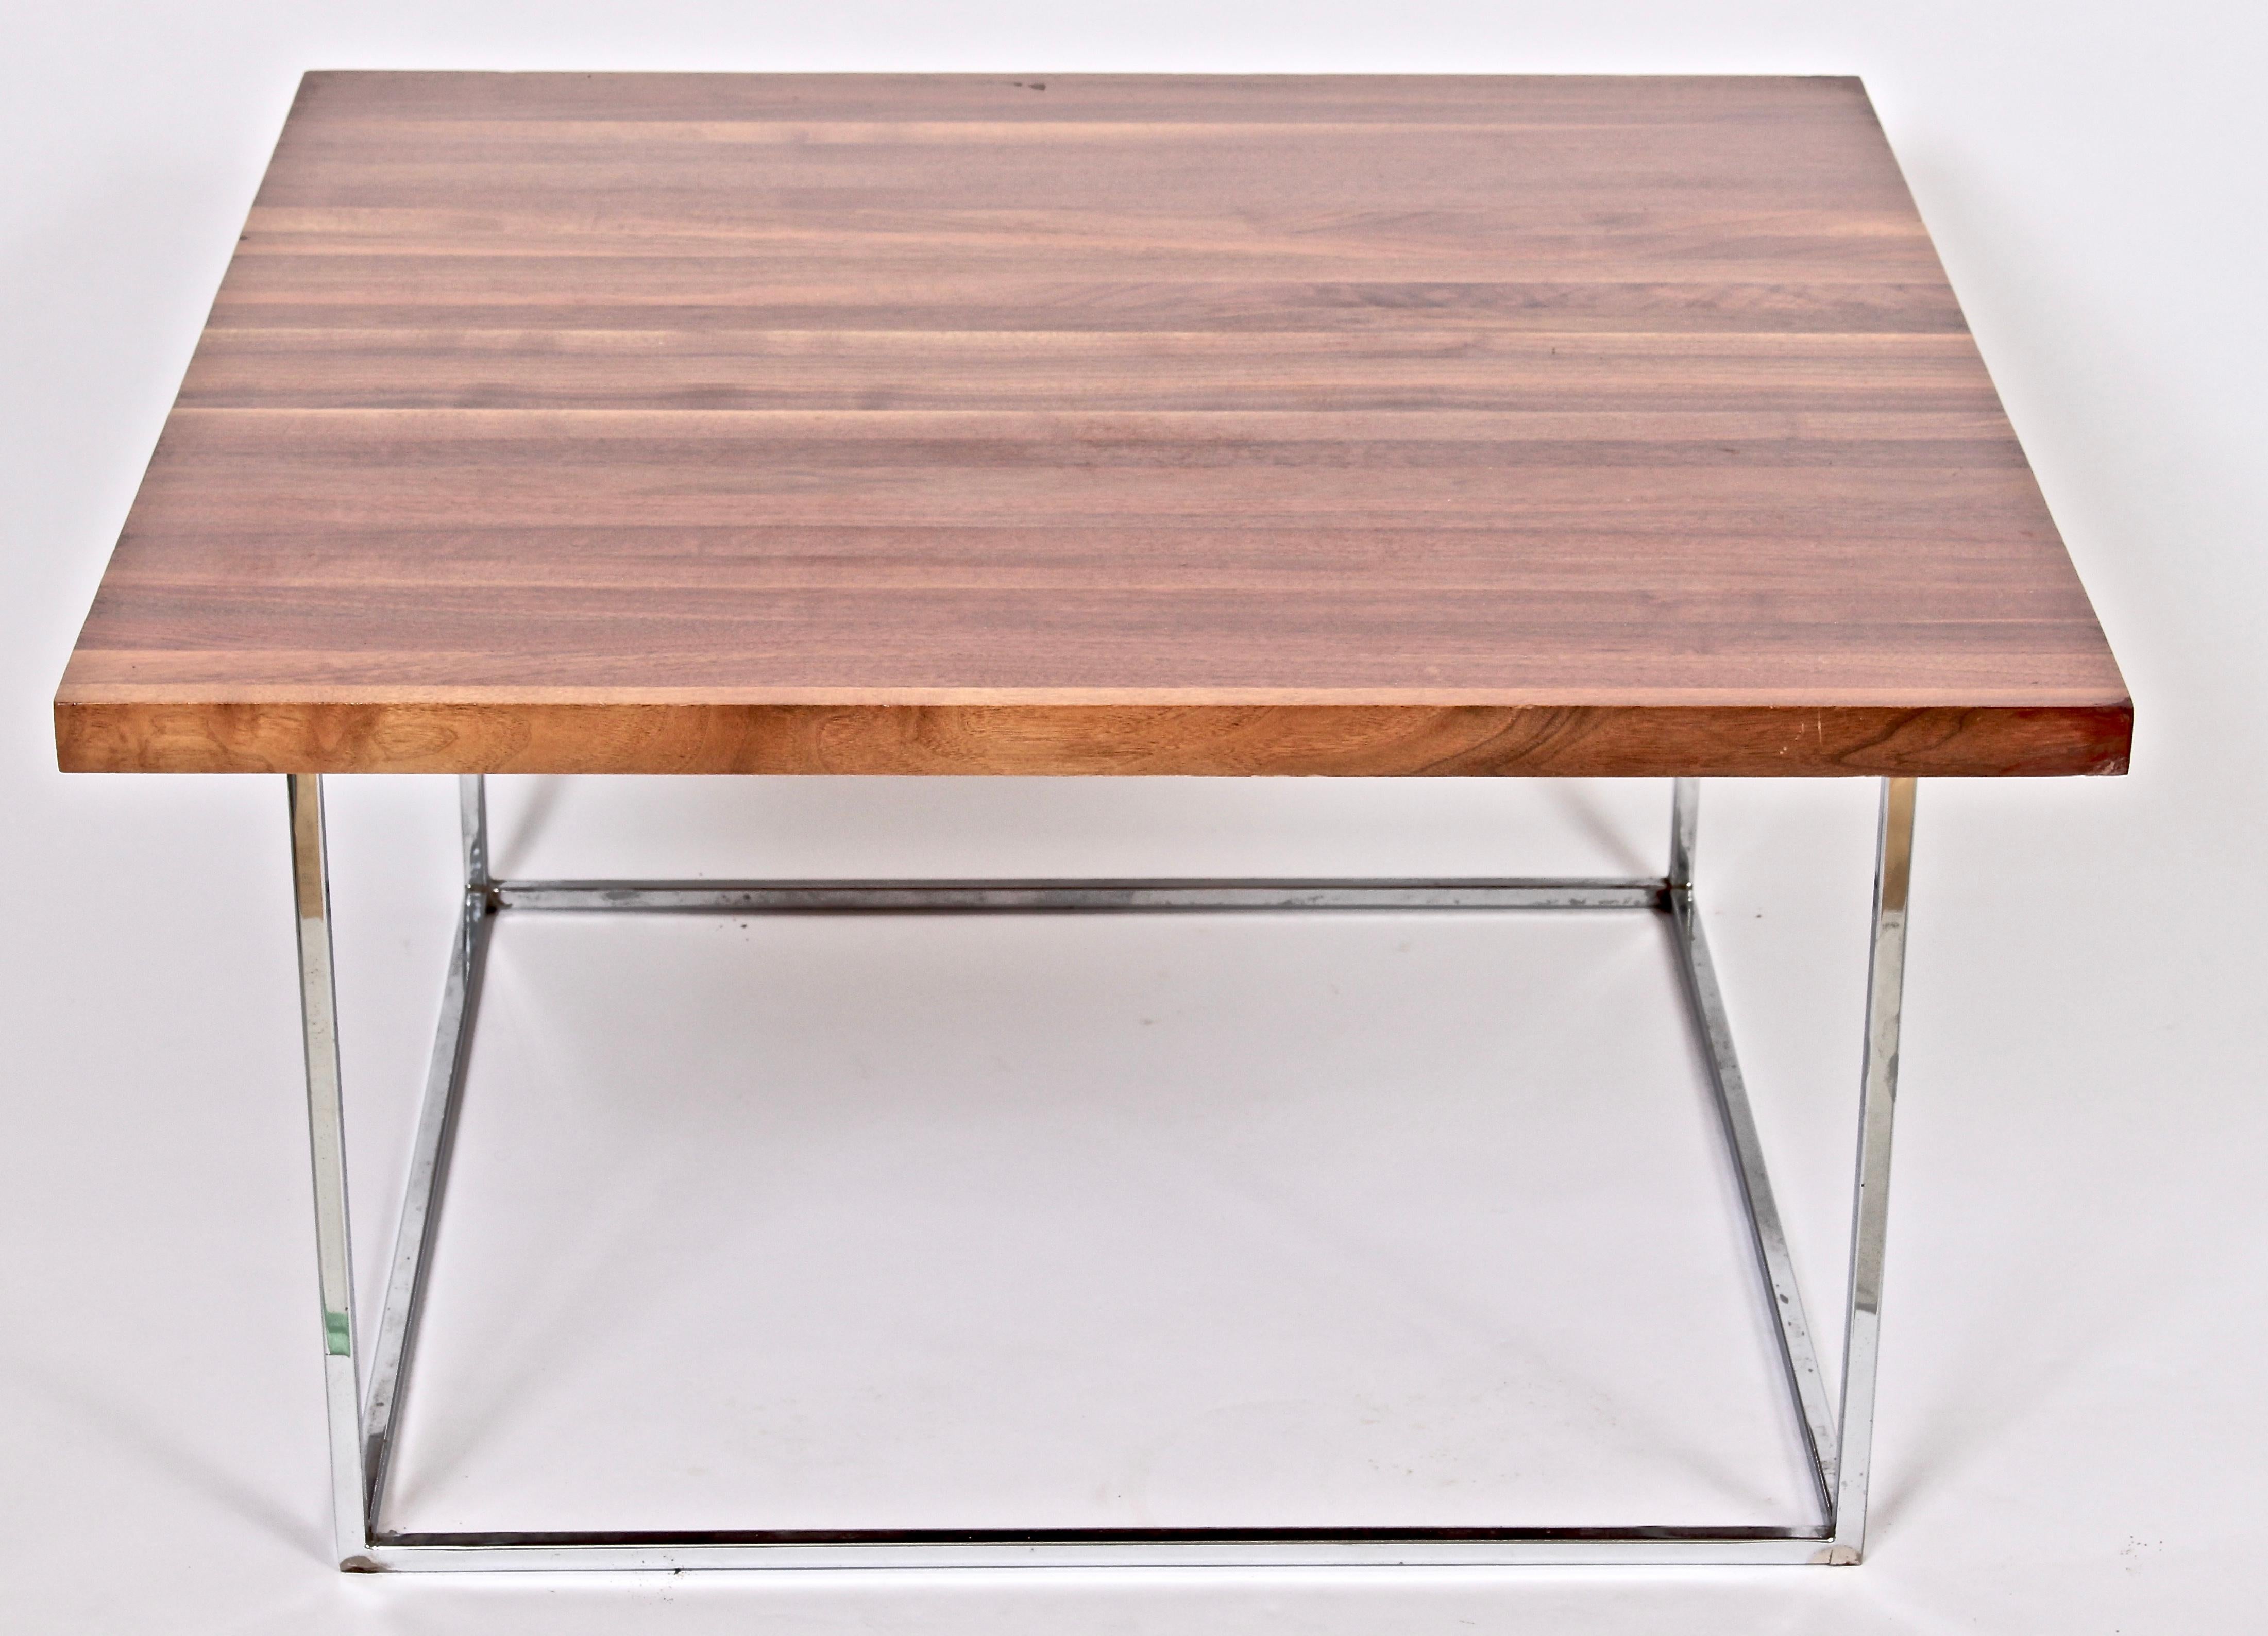 Milo Baughman Solid Black Walnut and Chrome Square Coffee Table, circa 1970 For Sale 4